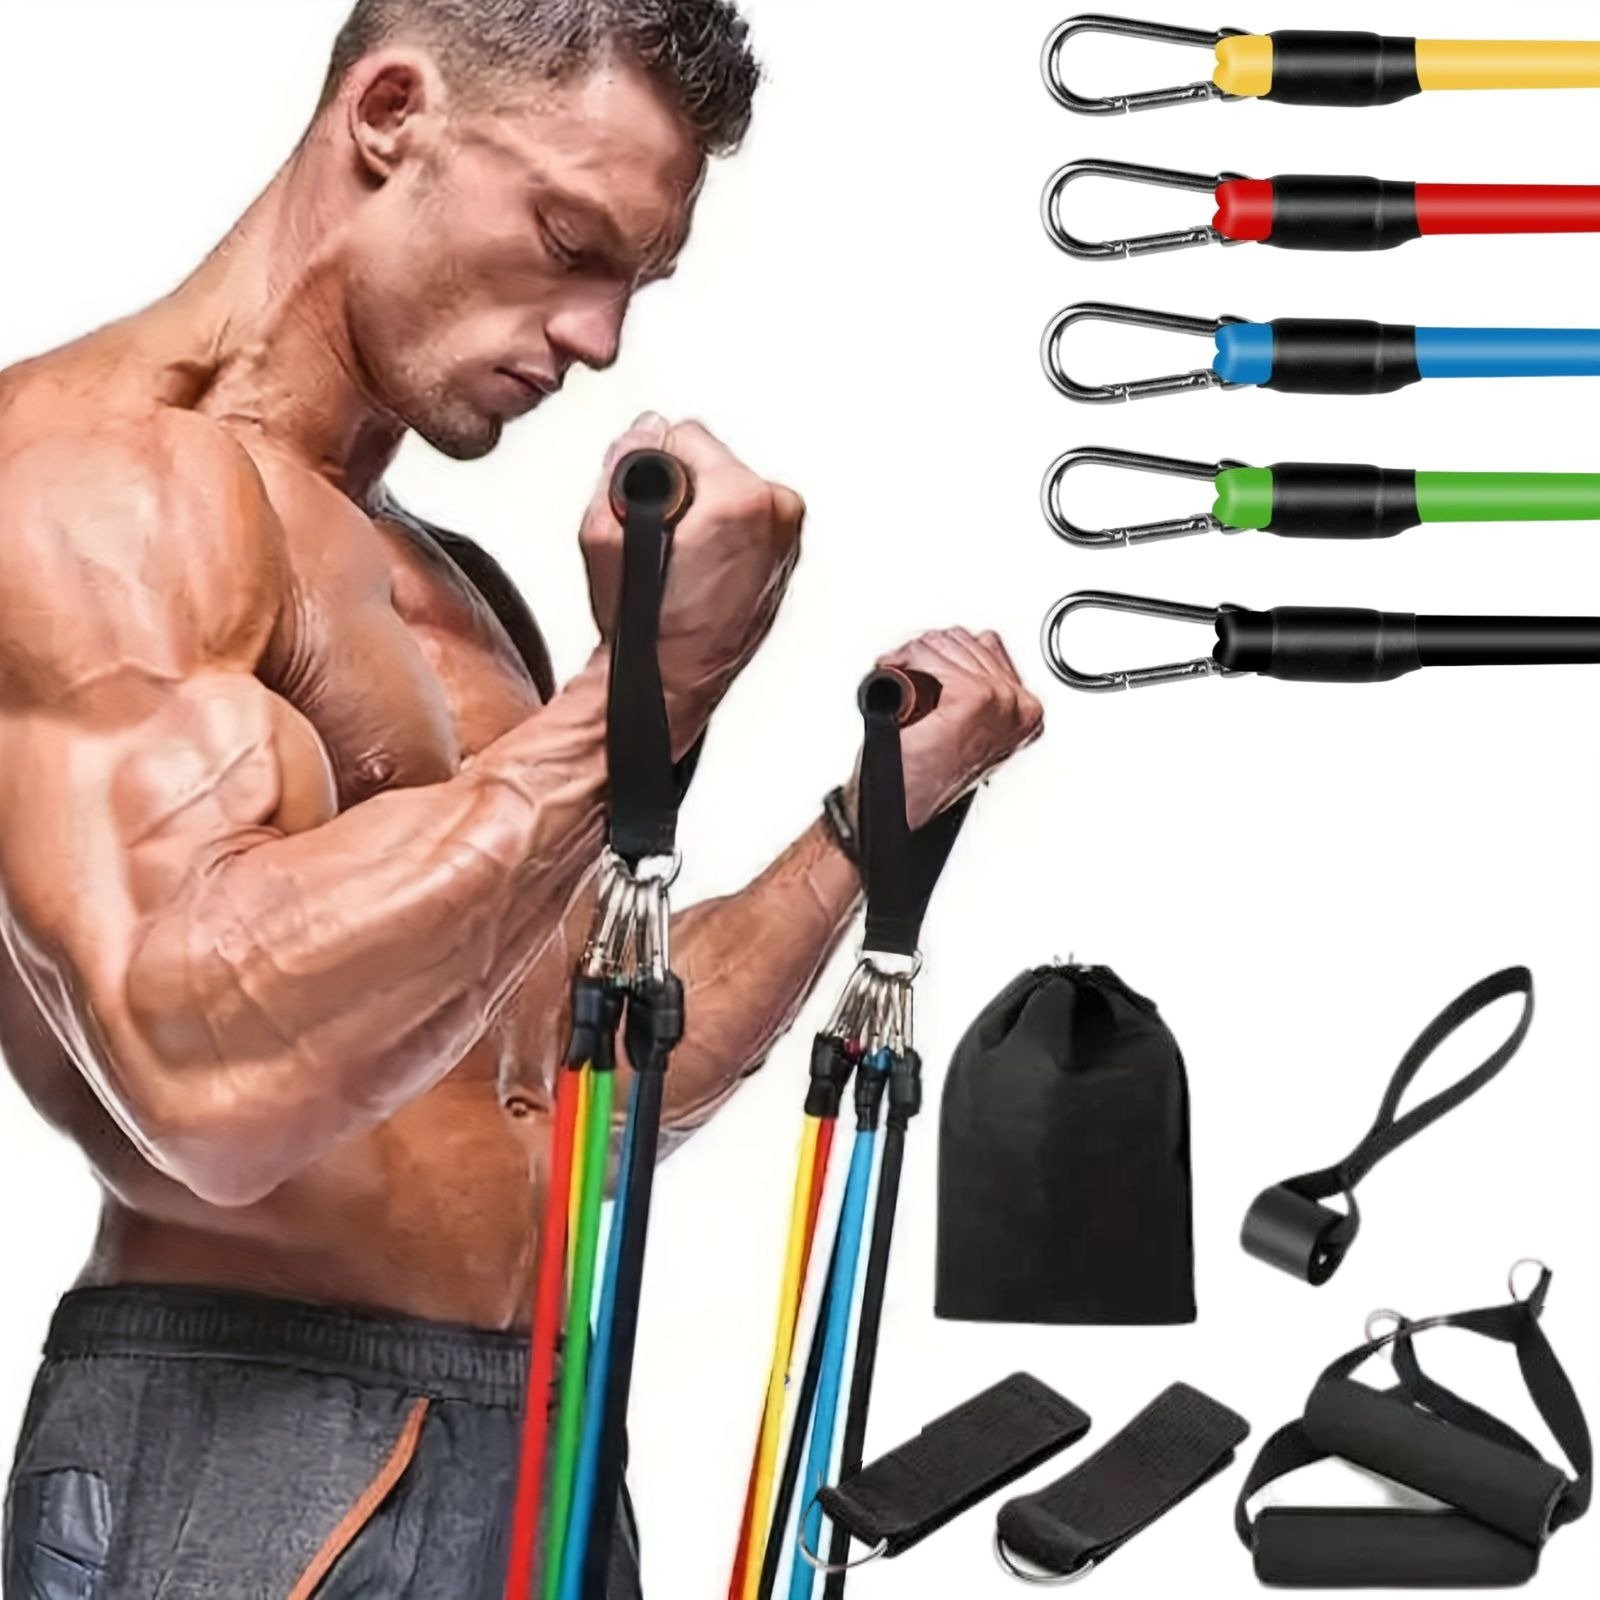 HPYGN Resistance Bands Set, Exercise Bands with Handles, Ankle Straps, Door Anchor, Carry Bag